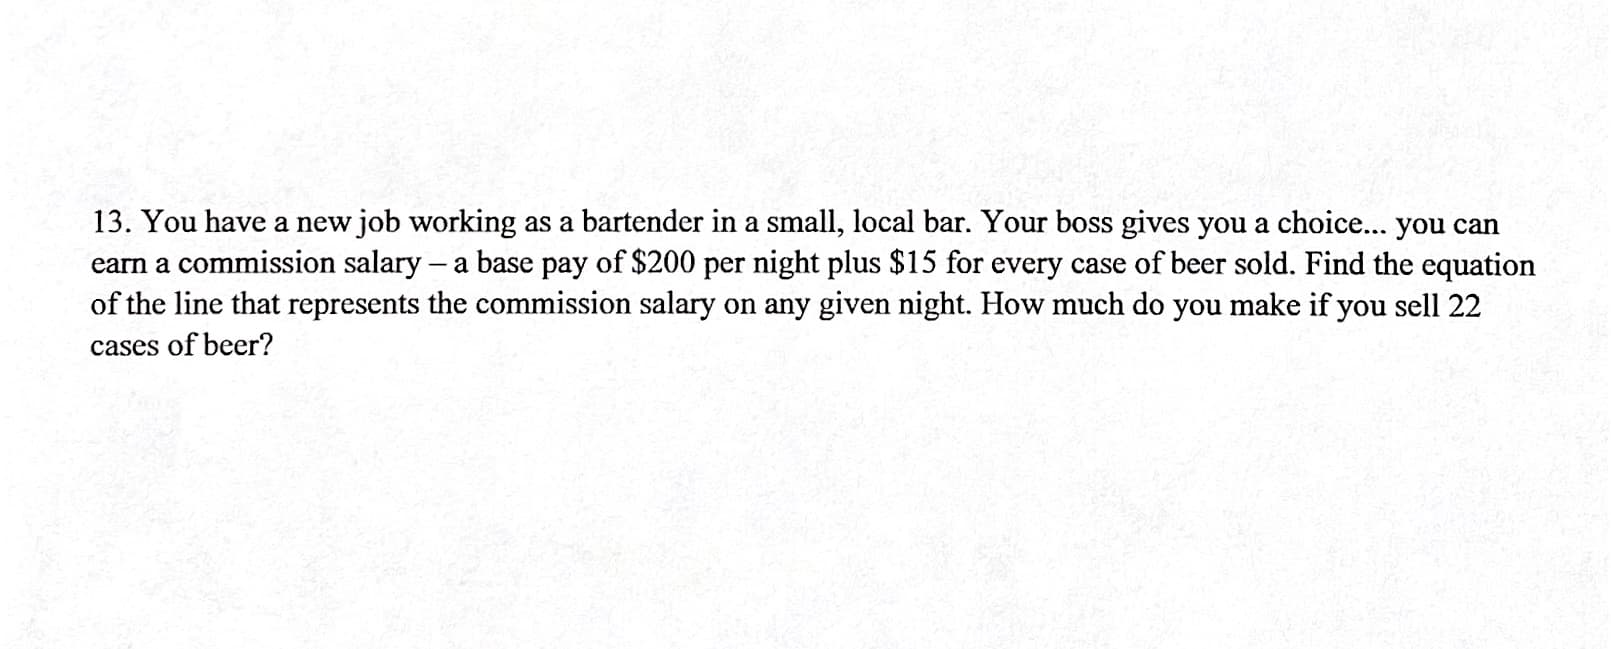 13. You have a new job working as a bartender in a small, local bar. Your boss gives you a choice... you can
carn a commission salary – a base pay of $200 per night plus $15 for every case of beer sold. Find the equation
of the line that represents the commission salary on any given night. How much do you make if you sell 22
cases of beer?
